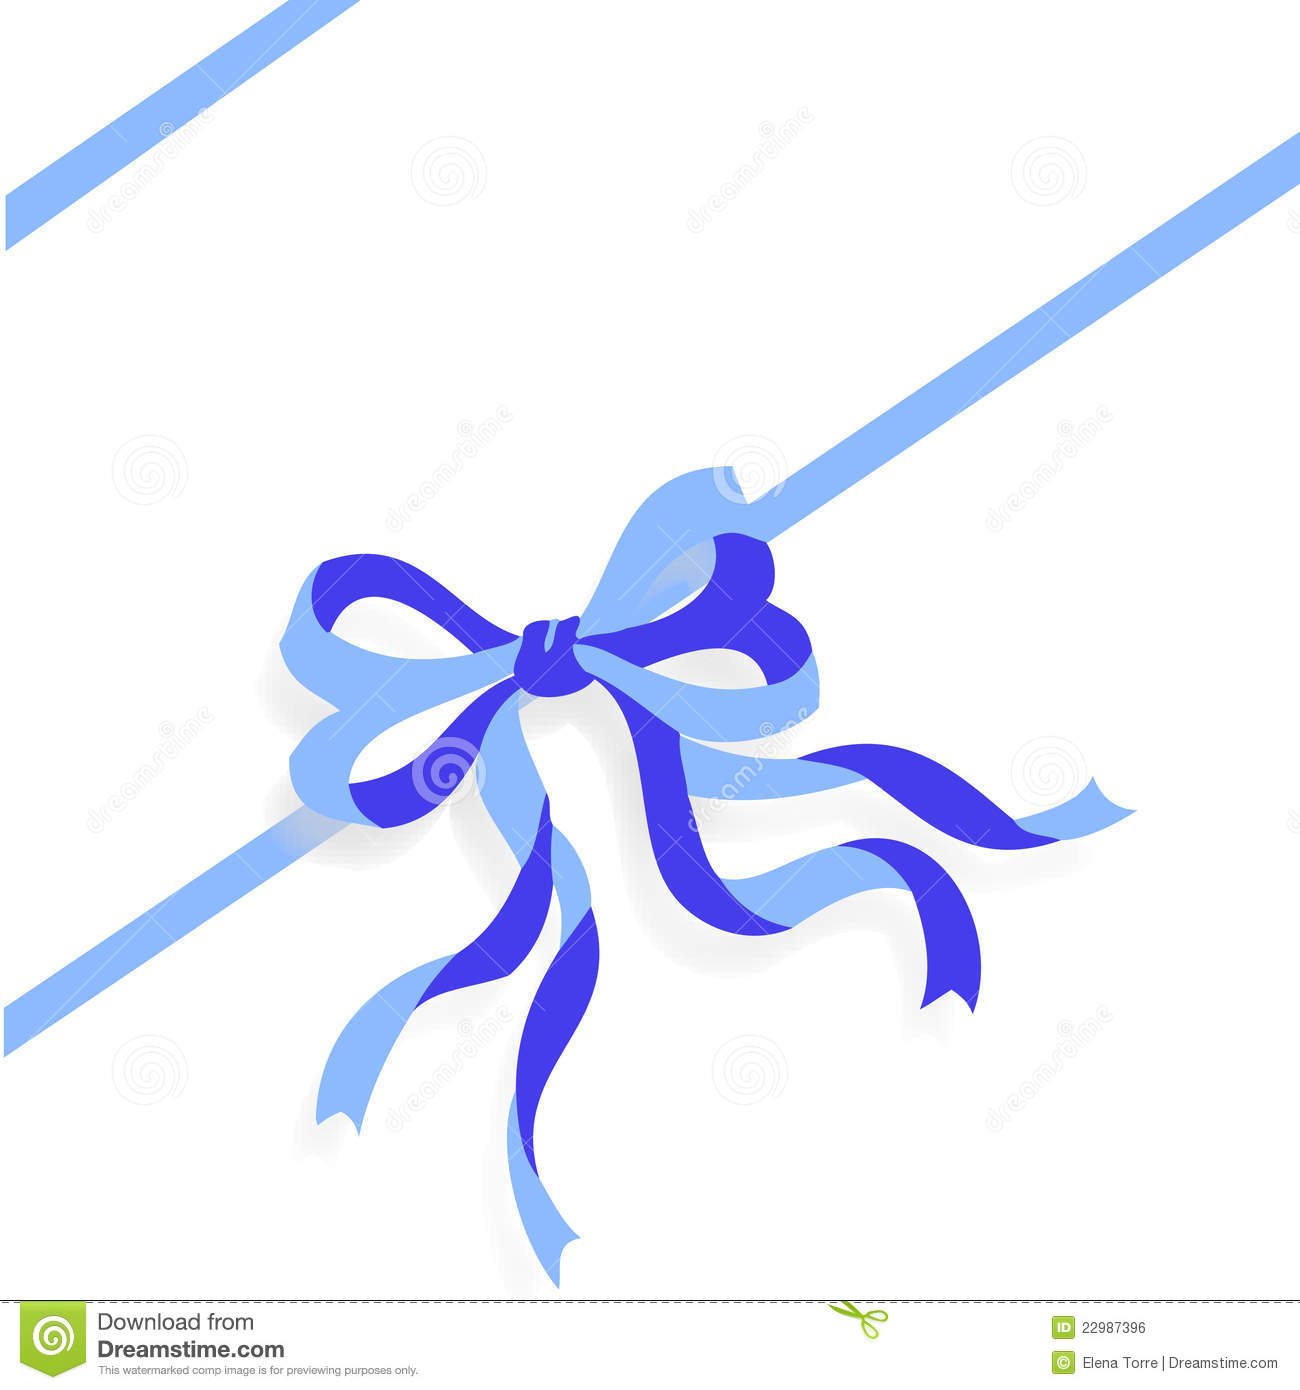 15 Blue Ribbon Vector Images